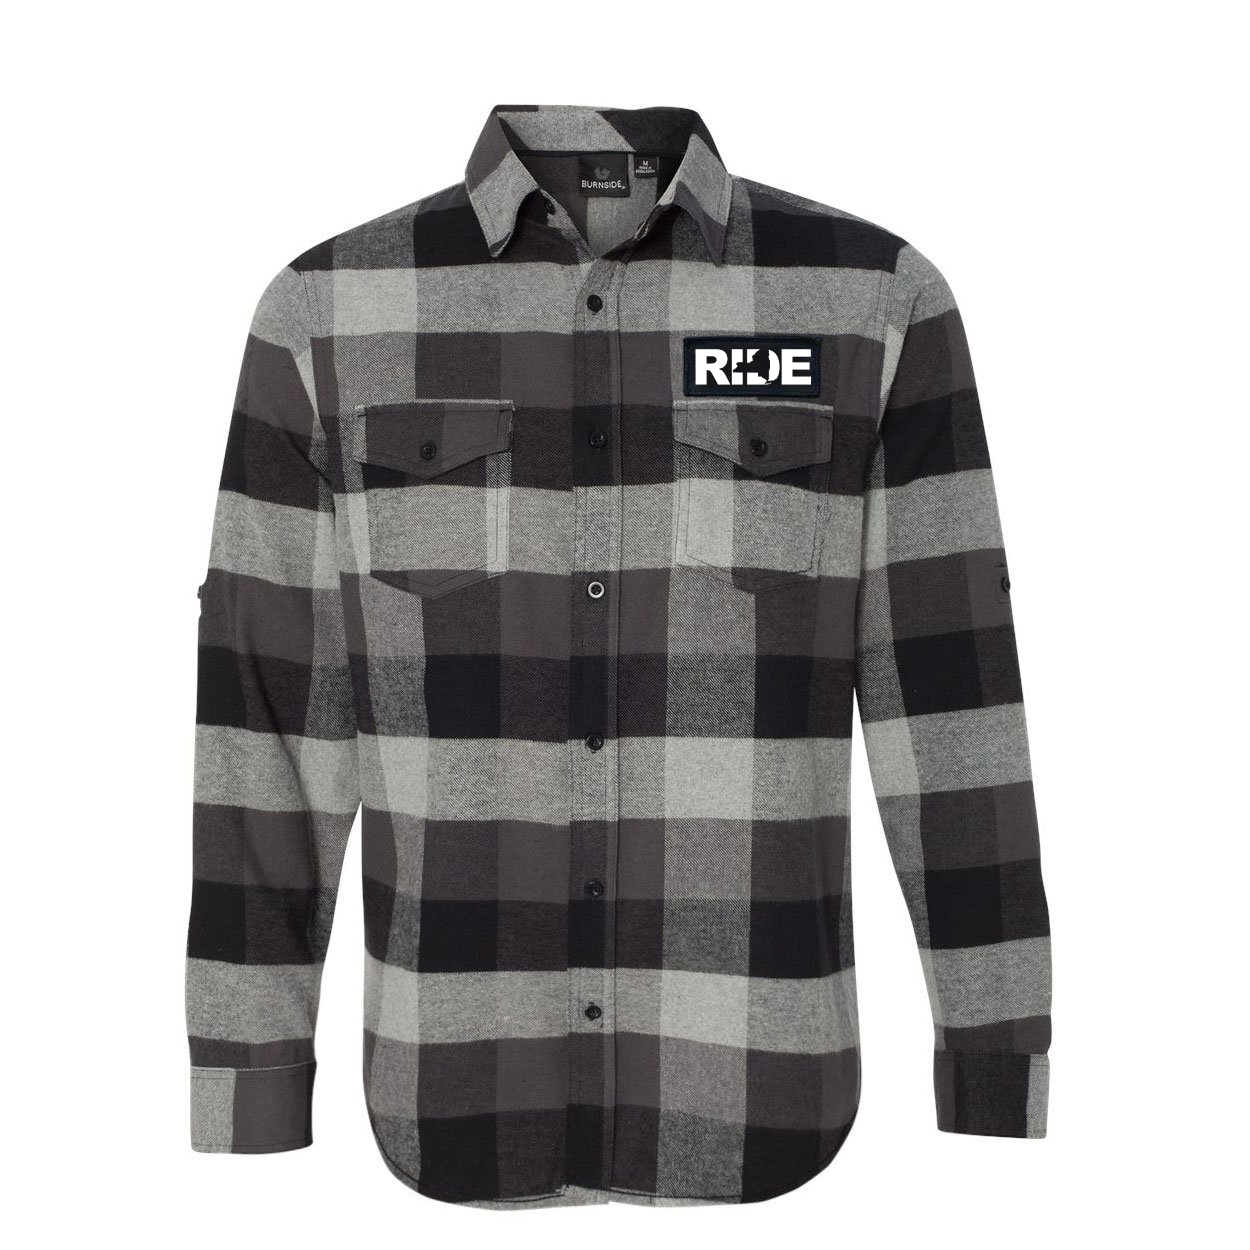 Ride New York Classic Unisex Long Sleeve Woven Patch Flannel Shirt Black/Gray (White Logo)